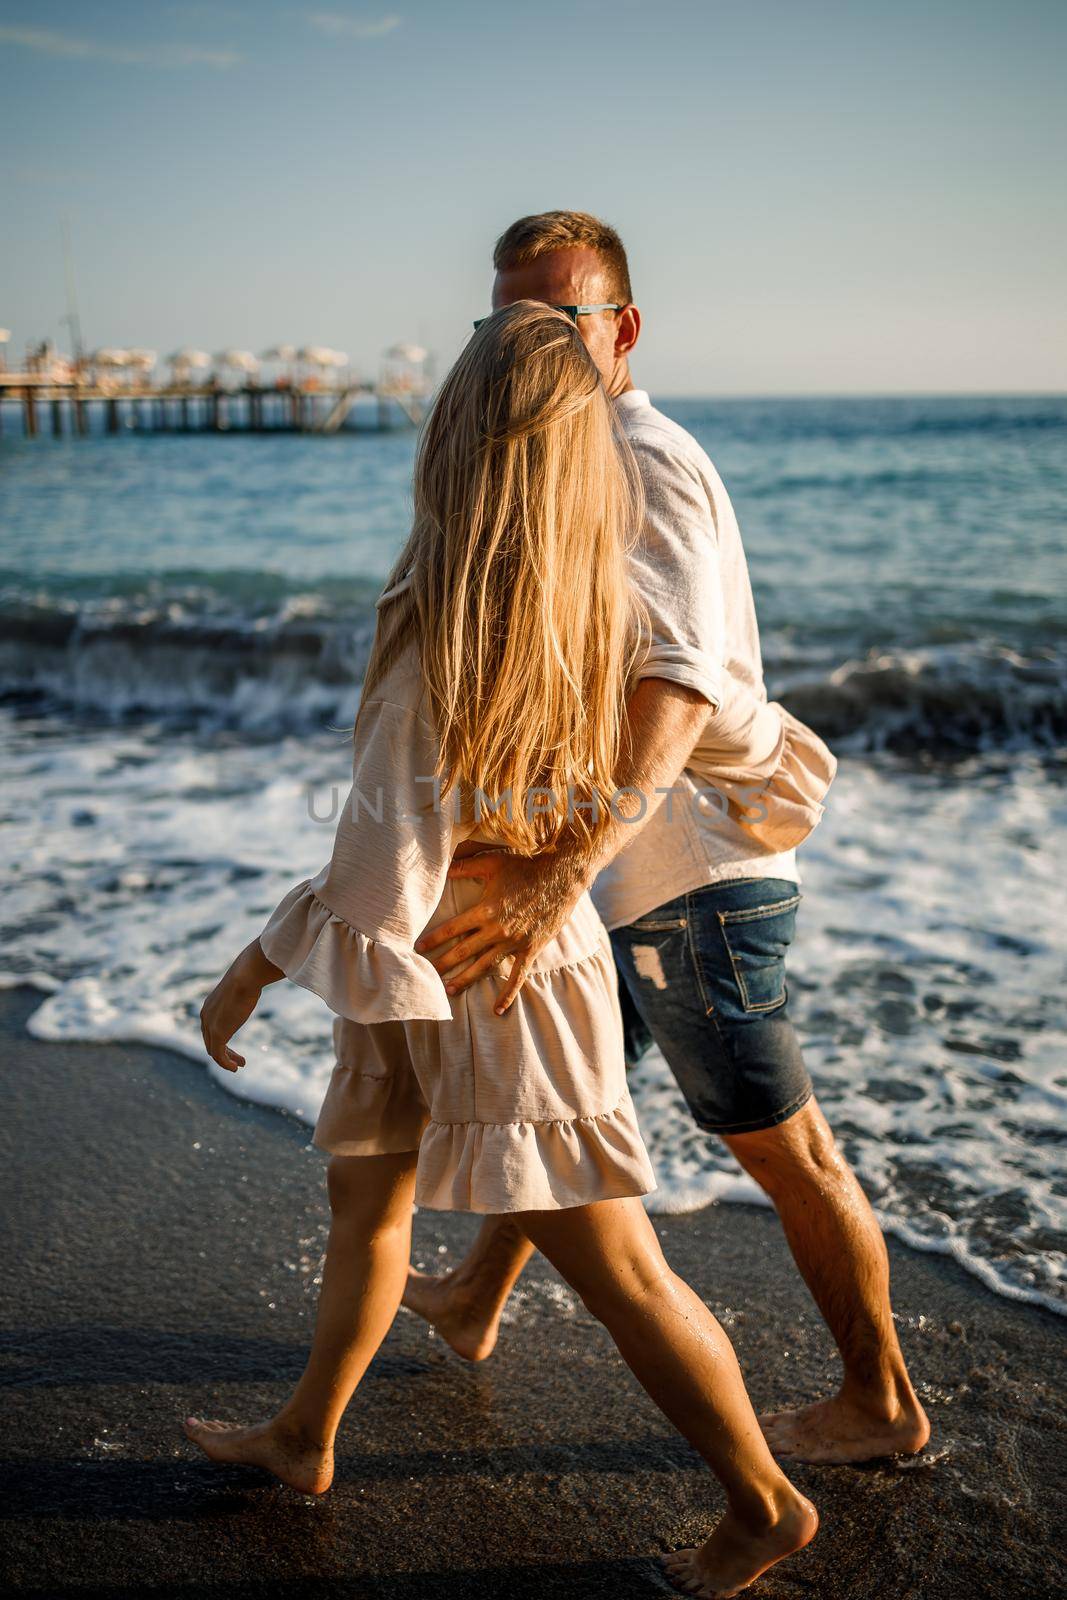 romantic young couple in love together on the sand walks along the beach of the Mediterranean sea. Summer vacation in a warm country. by Dmitrytph